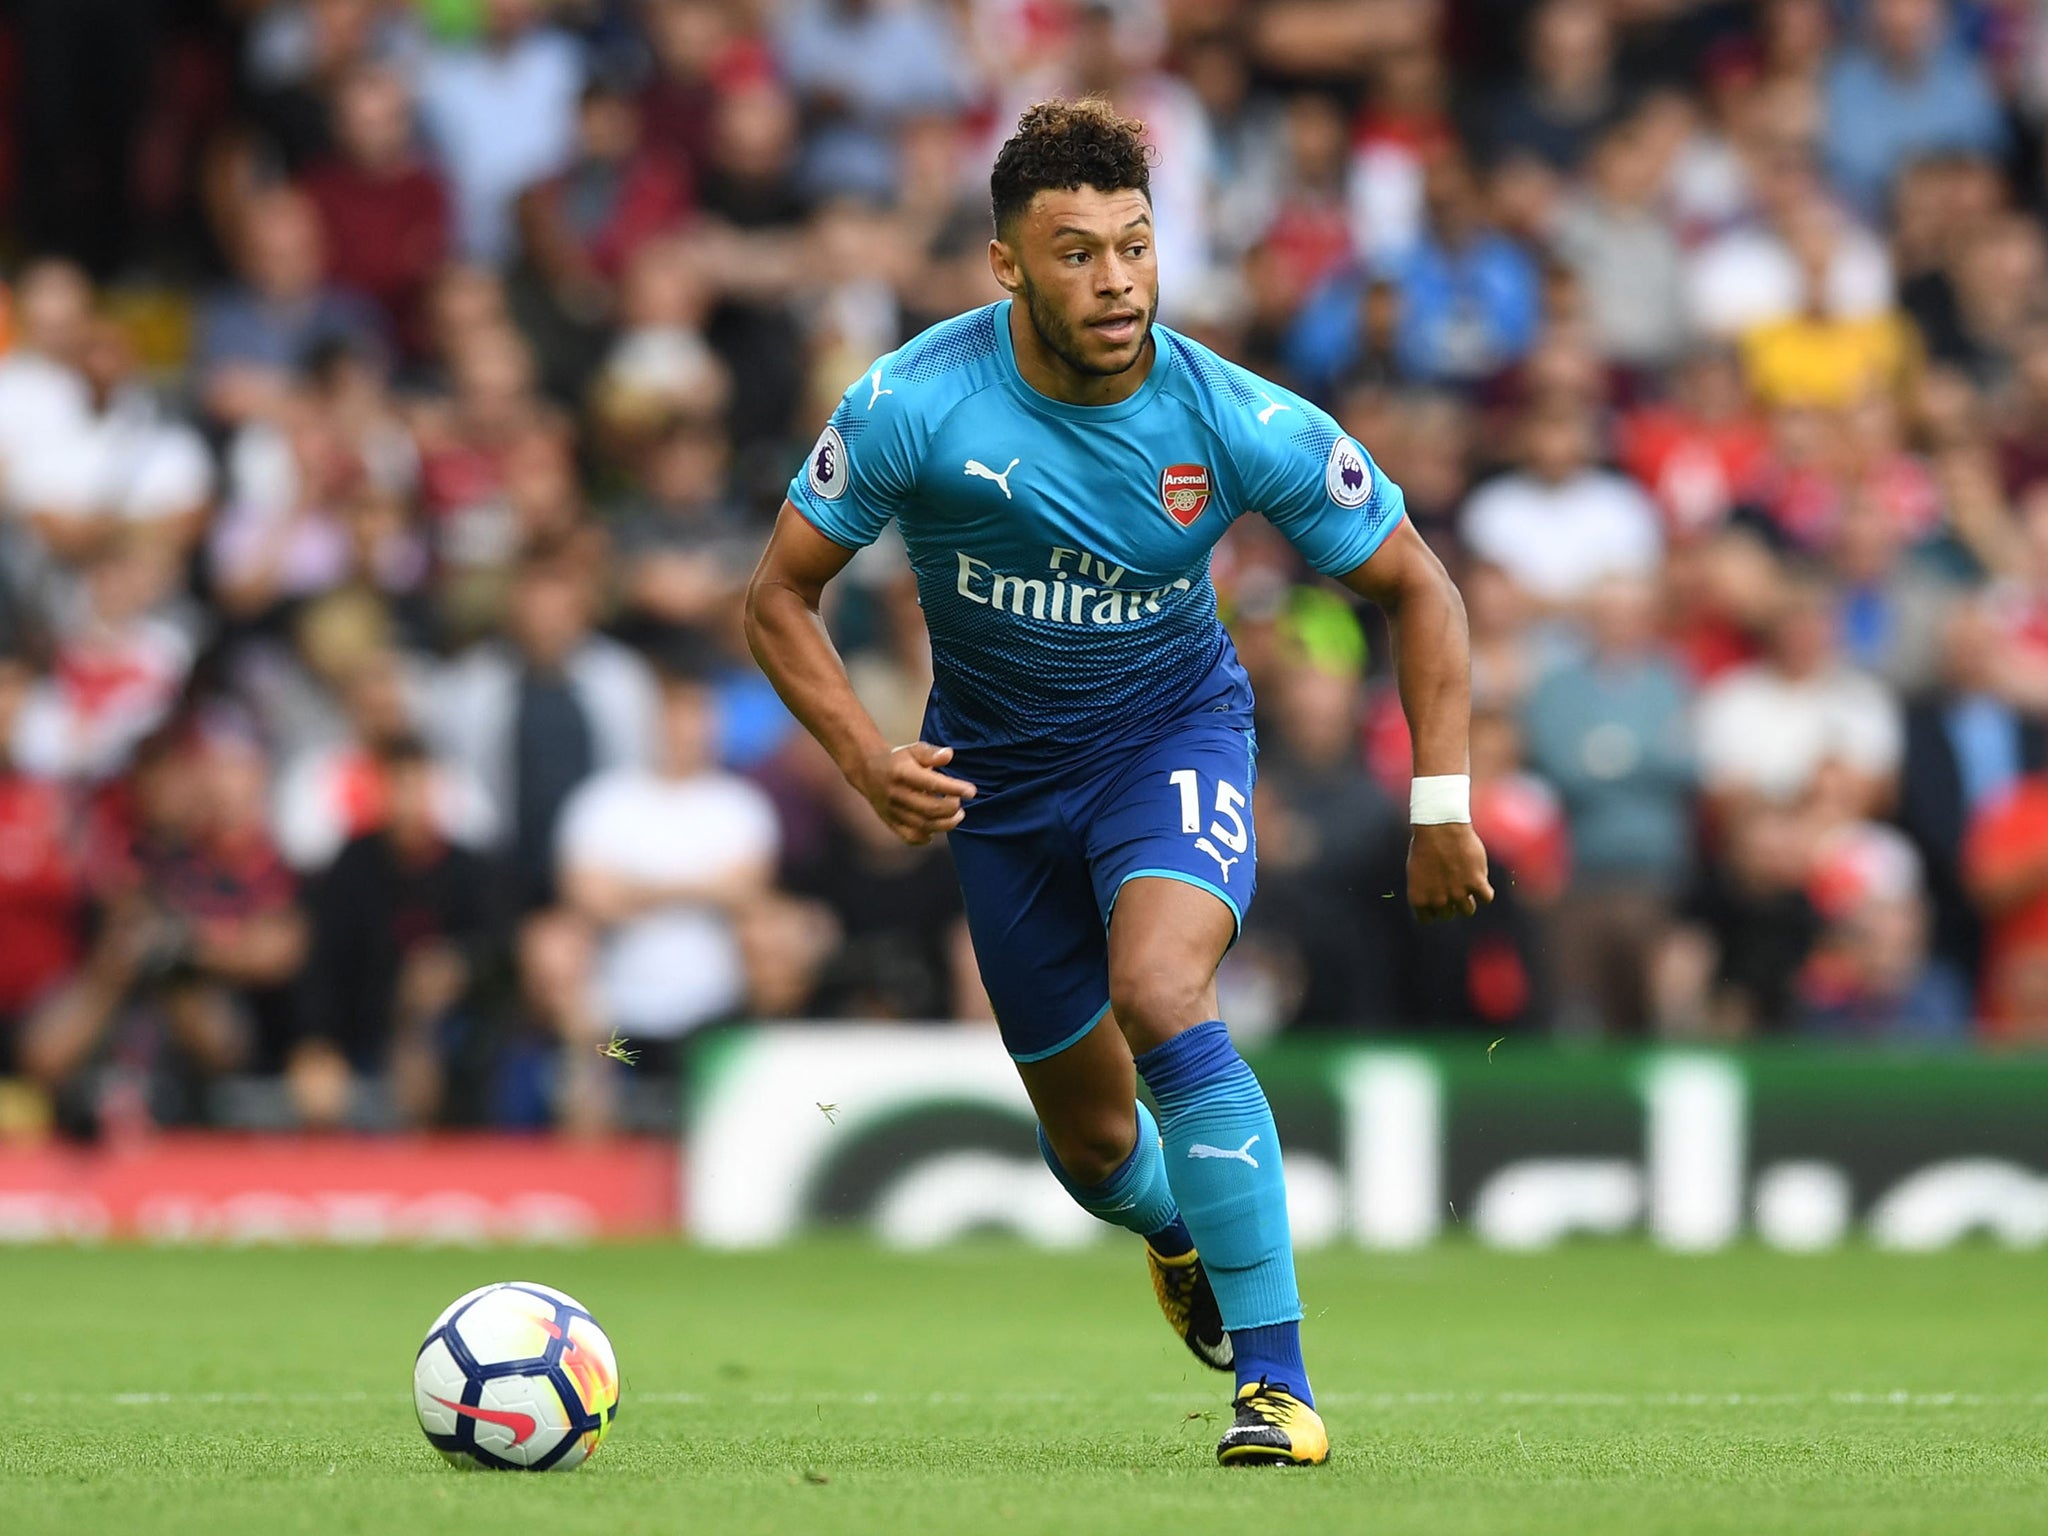 Alex Oxlade-Chamberlain is on the verge of leaving Arsenal for Chelsea